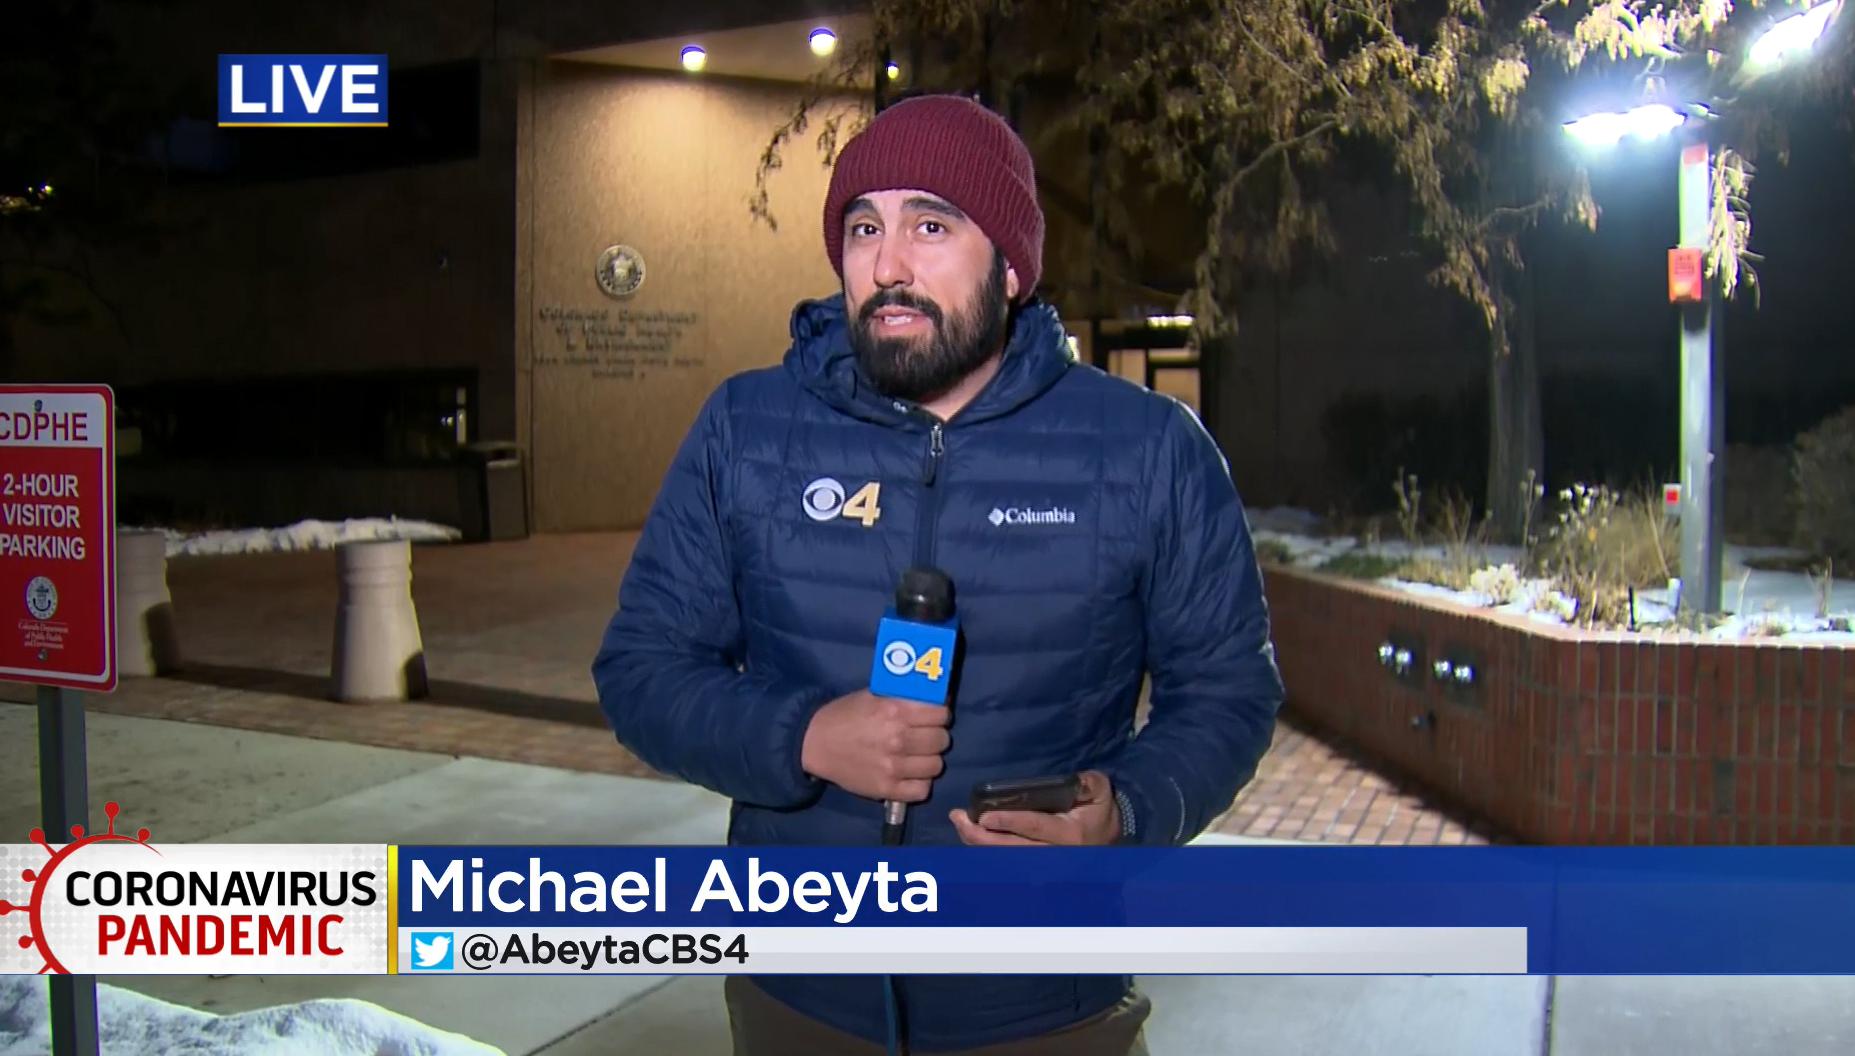 Michael Abeyta from KCNC reporting live outside of a building